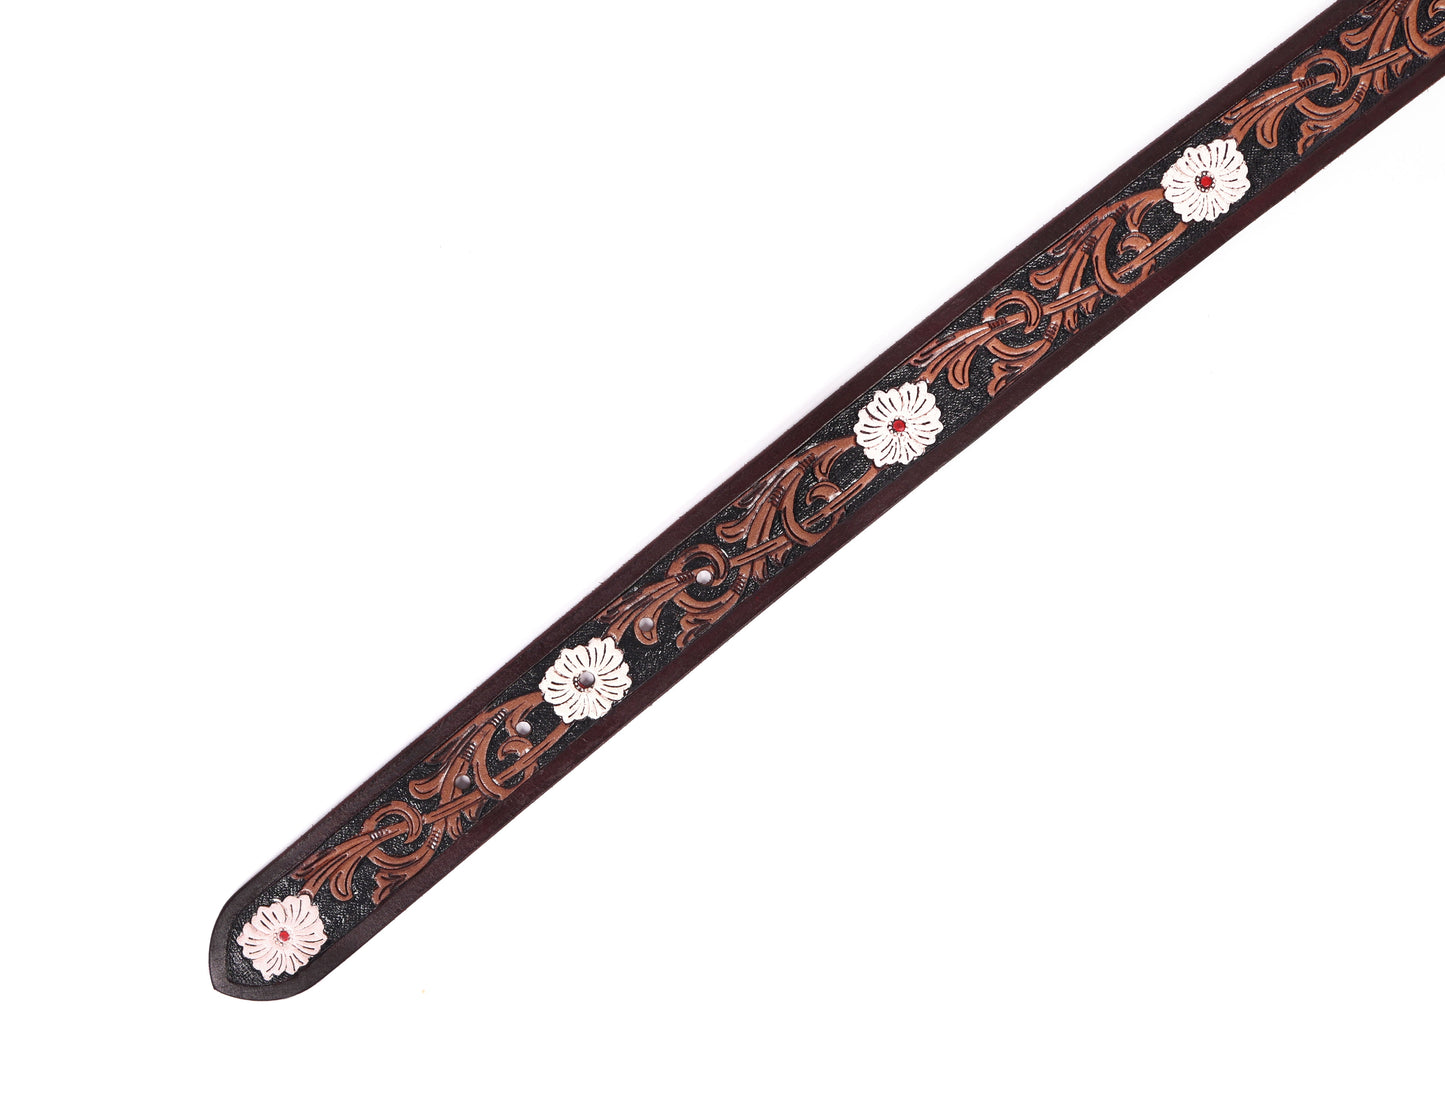 Artisan Brown Leather Tooling Belt: Animal-Inspired Buckle and Floral Accents. - CELTICINDIA